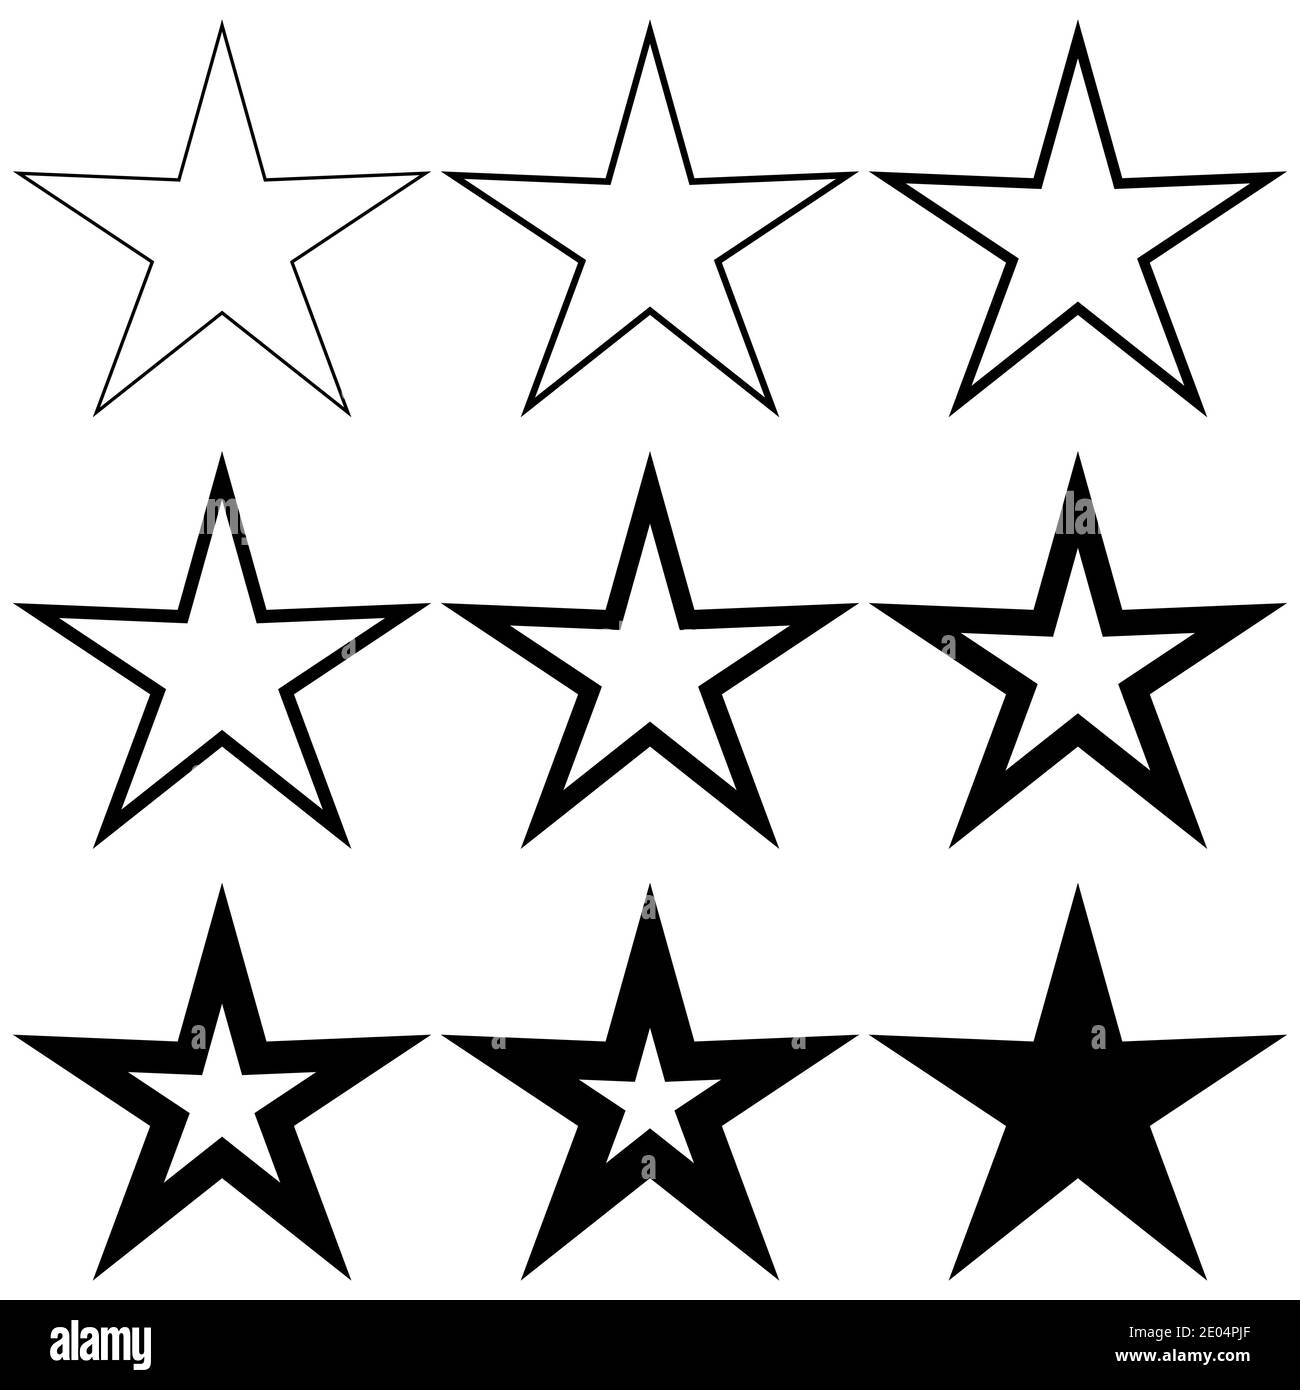 Set pentagonal stars with different stroke thickness, vector logo icon thin and thick star, symbol of radiance, new birth and light Stock Vector